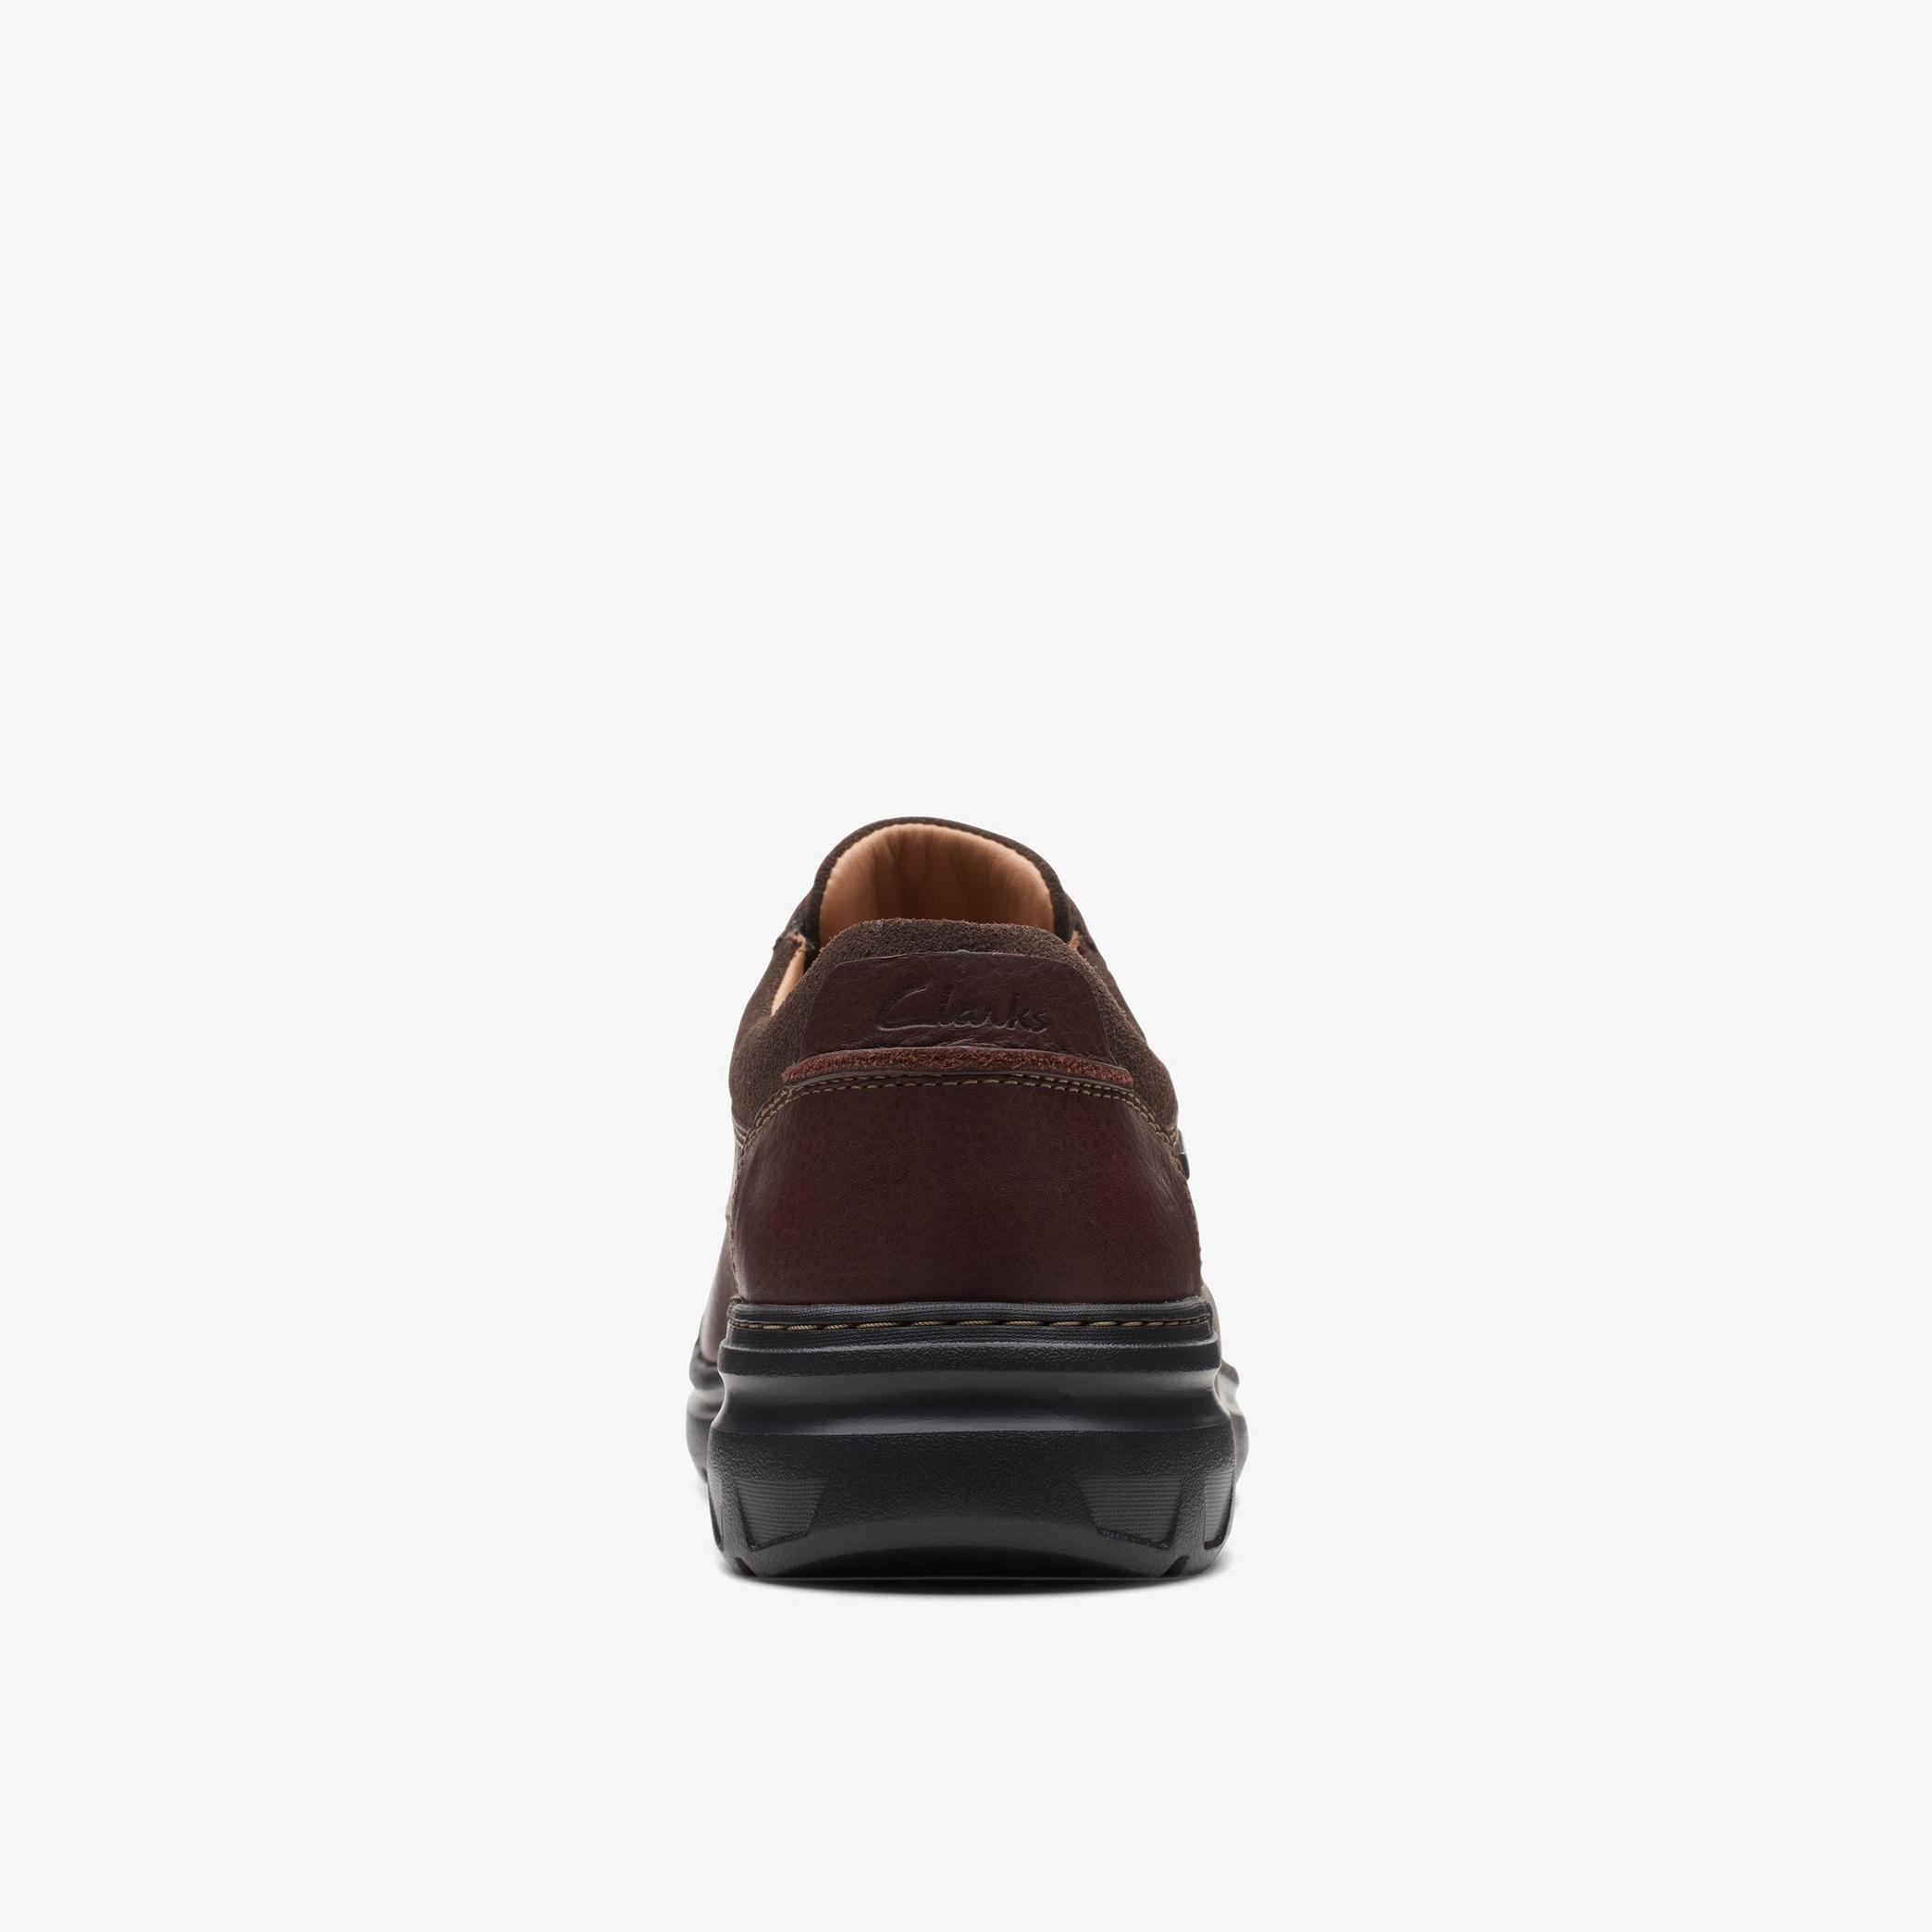 Rockie2 Lo GTX Mahogany Leather Trainers, view 5 of 6